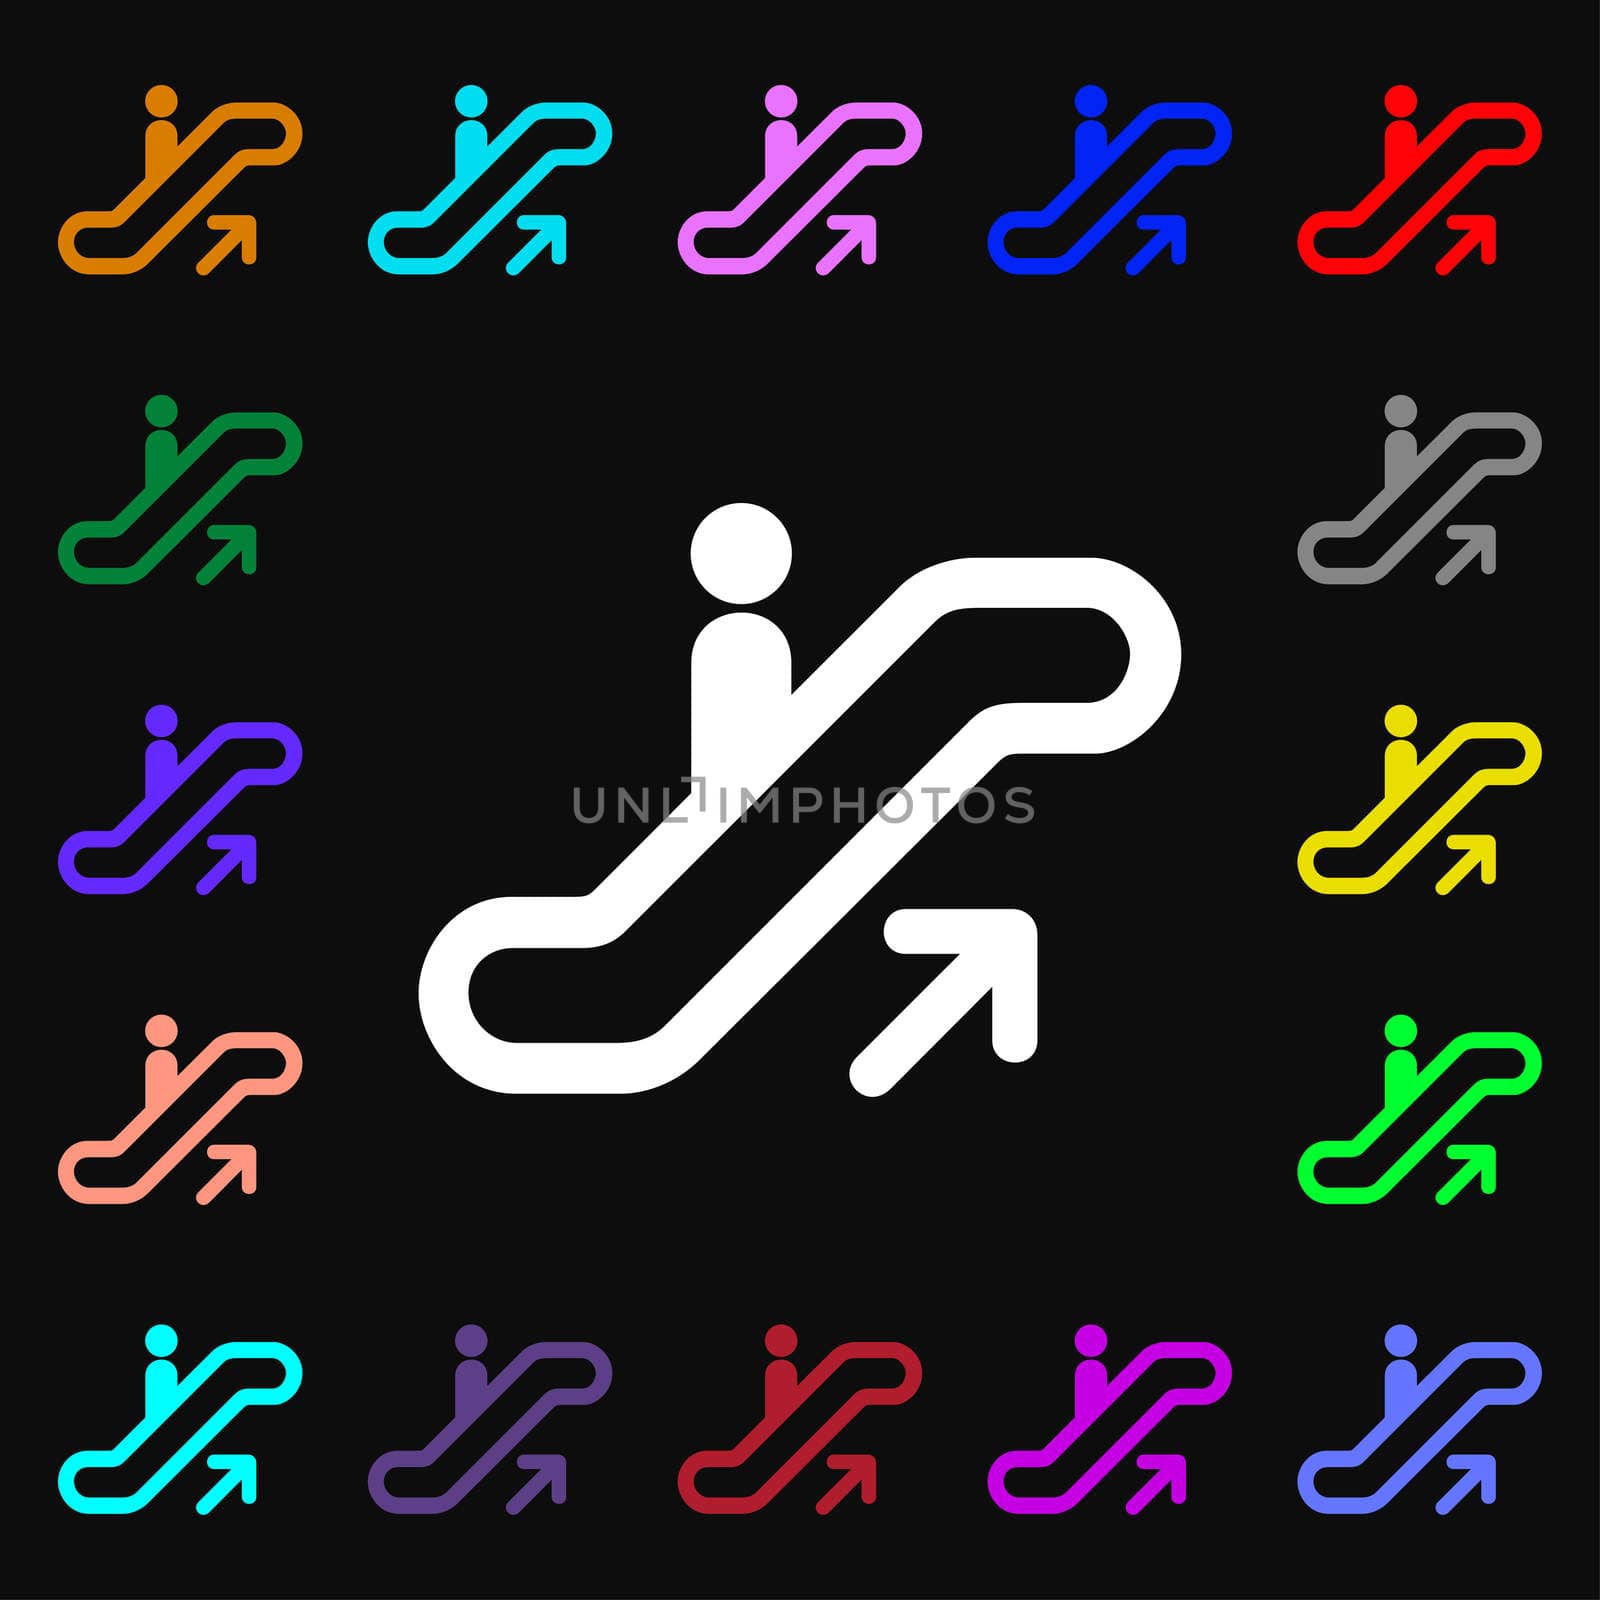 elevator, Escalator, Staircase icon sign. Lots of colorful symbols for your design. illustration